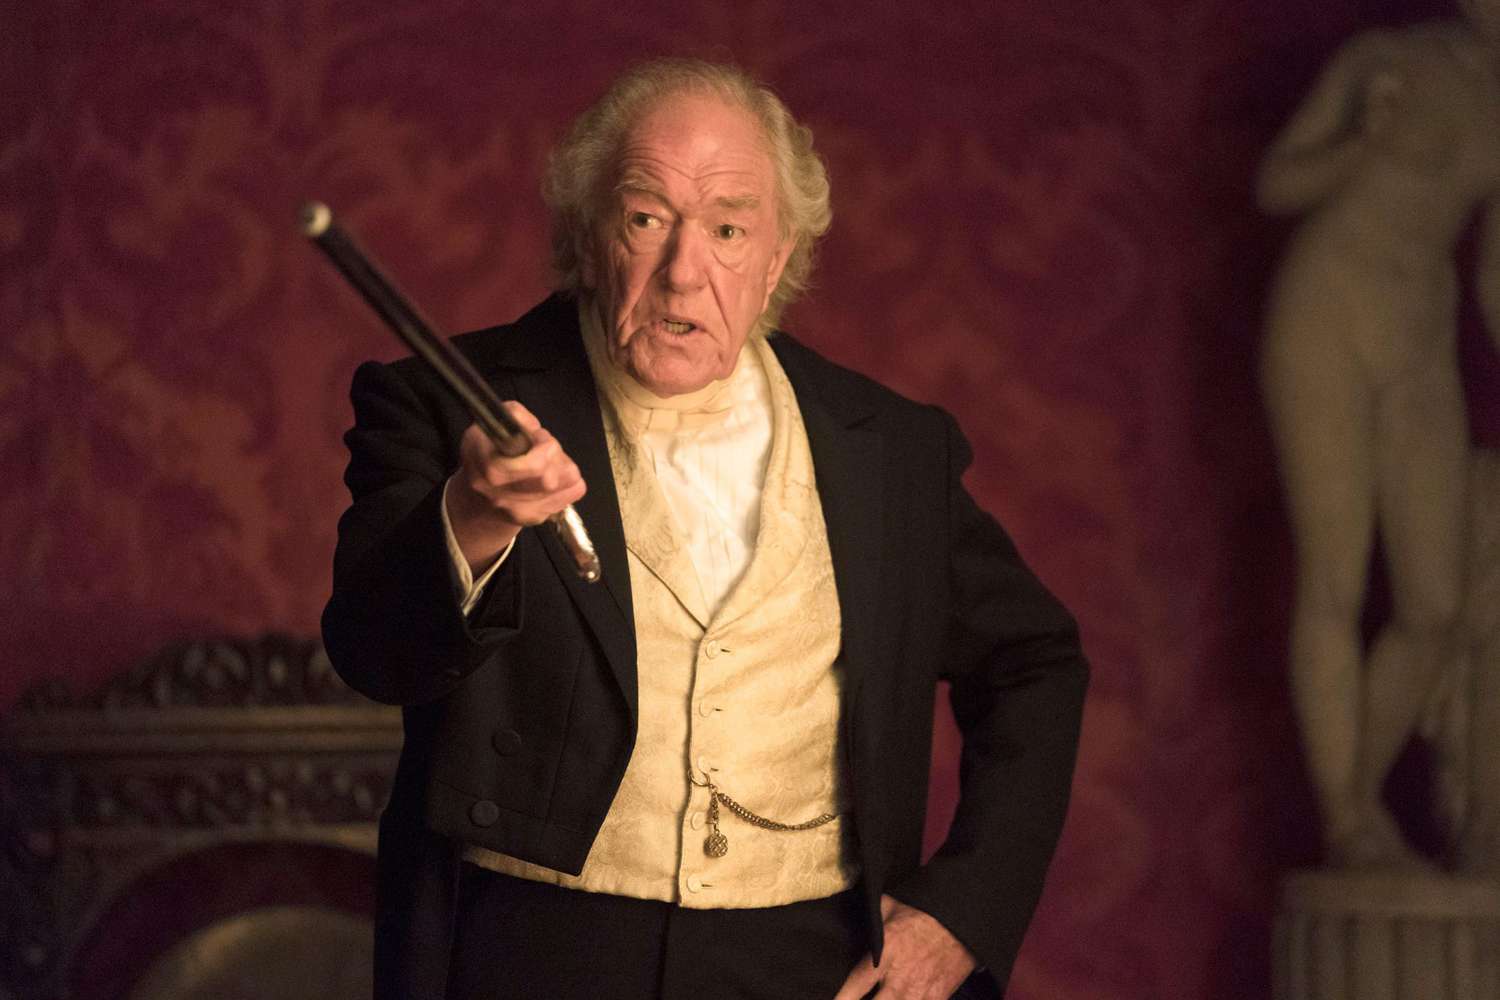 Mr. Laurence (Michael Gambon) a.k.a. The Secretly Kind One